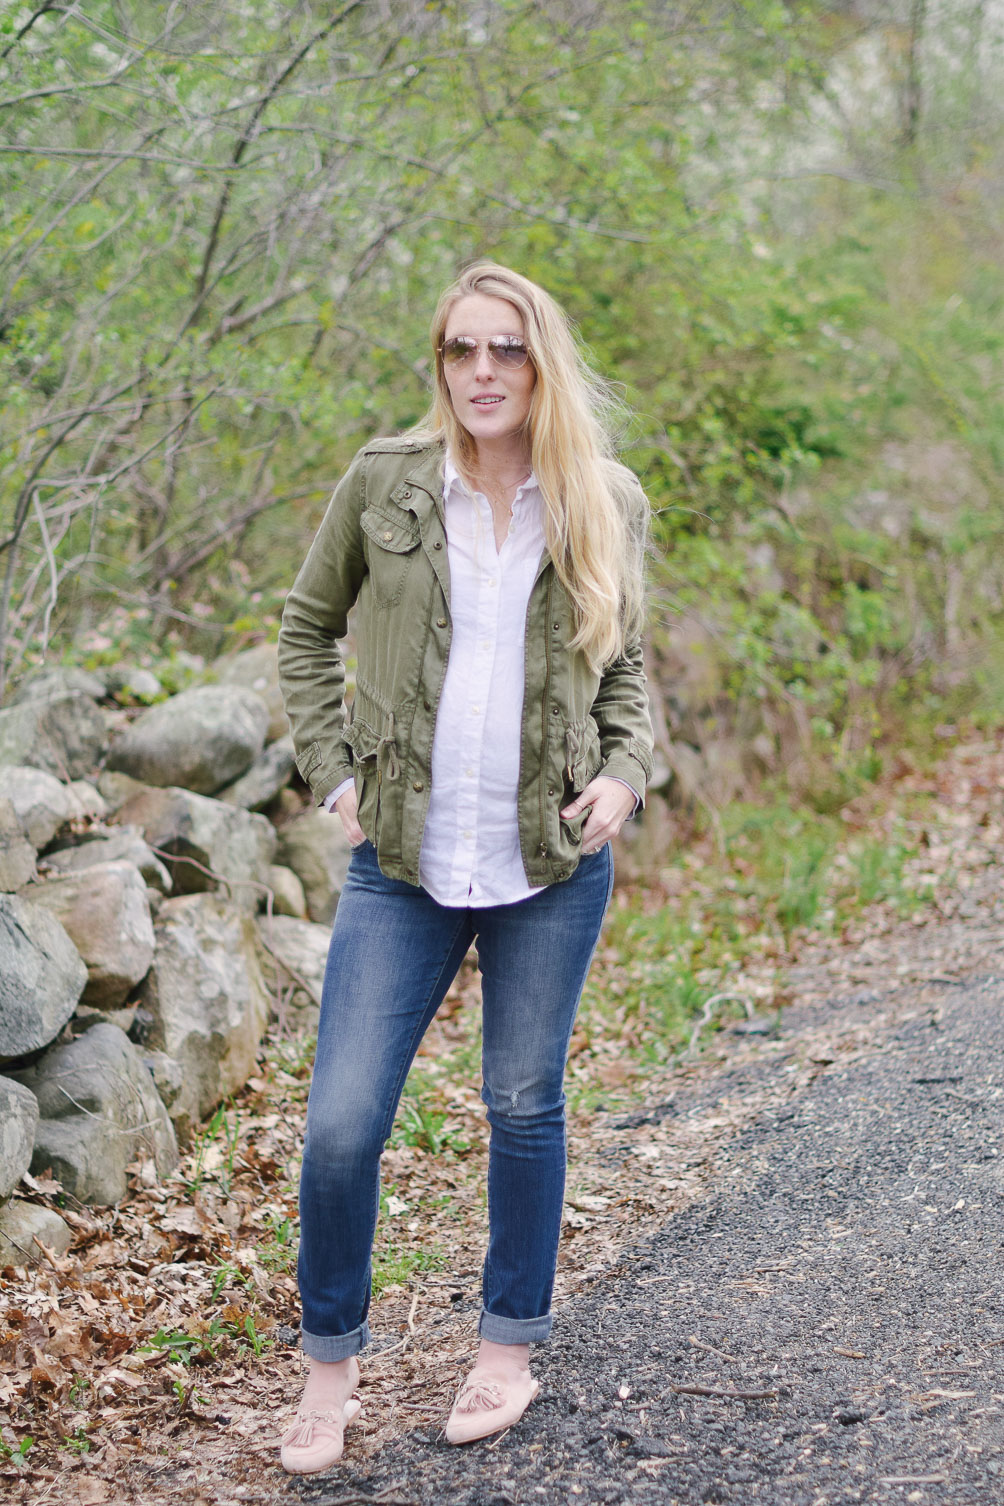 styling spring earth tones in this maternity fashion look with an army green jacket and skinny jeans